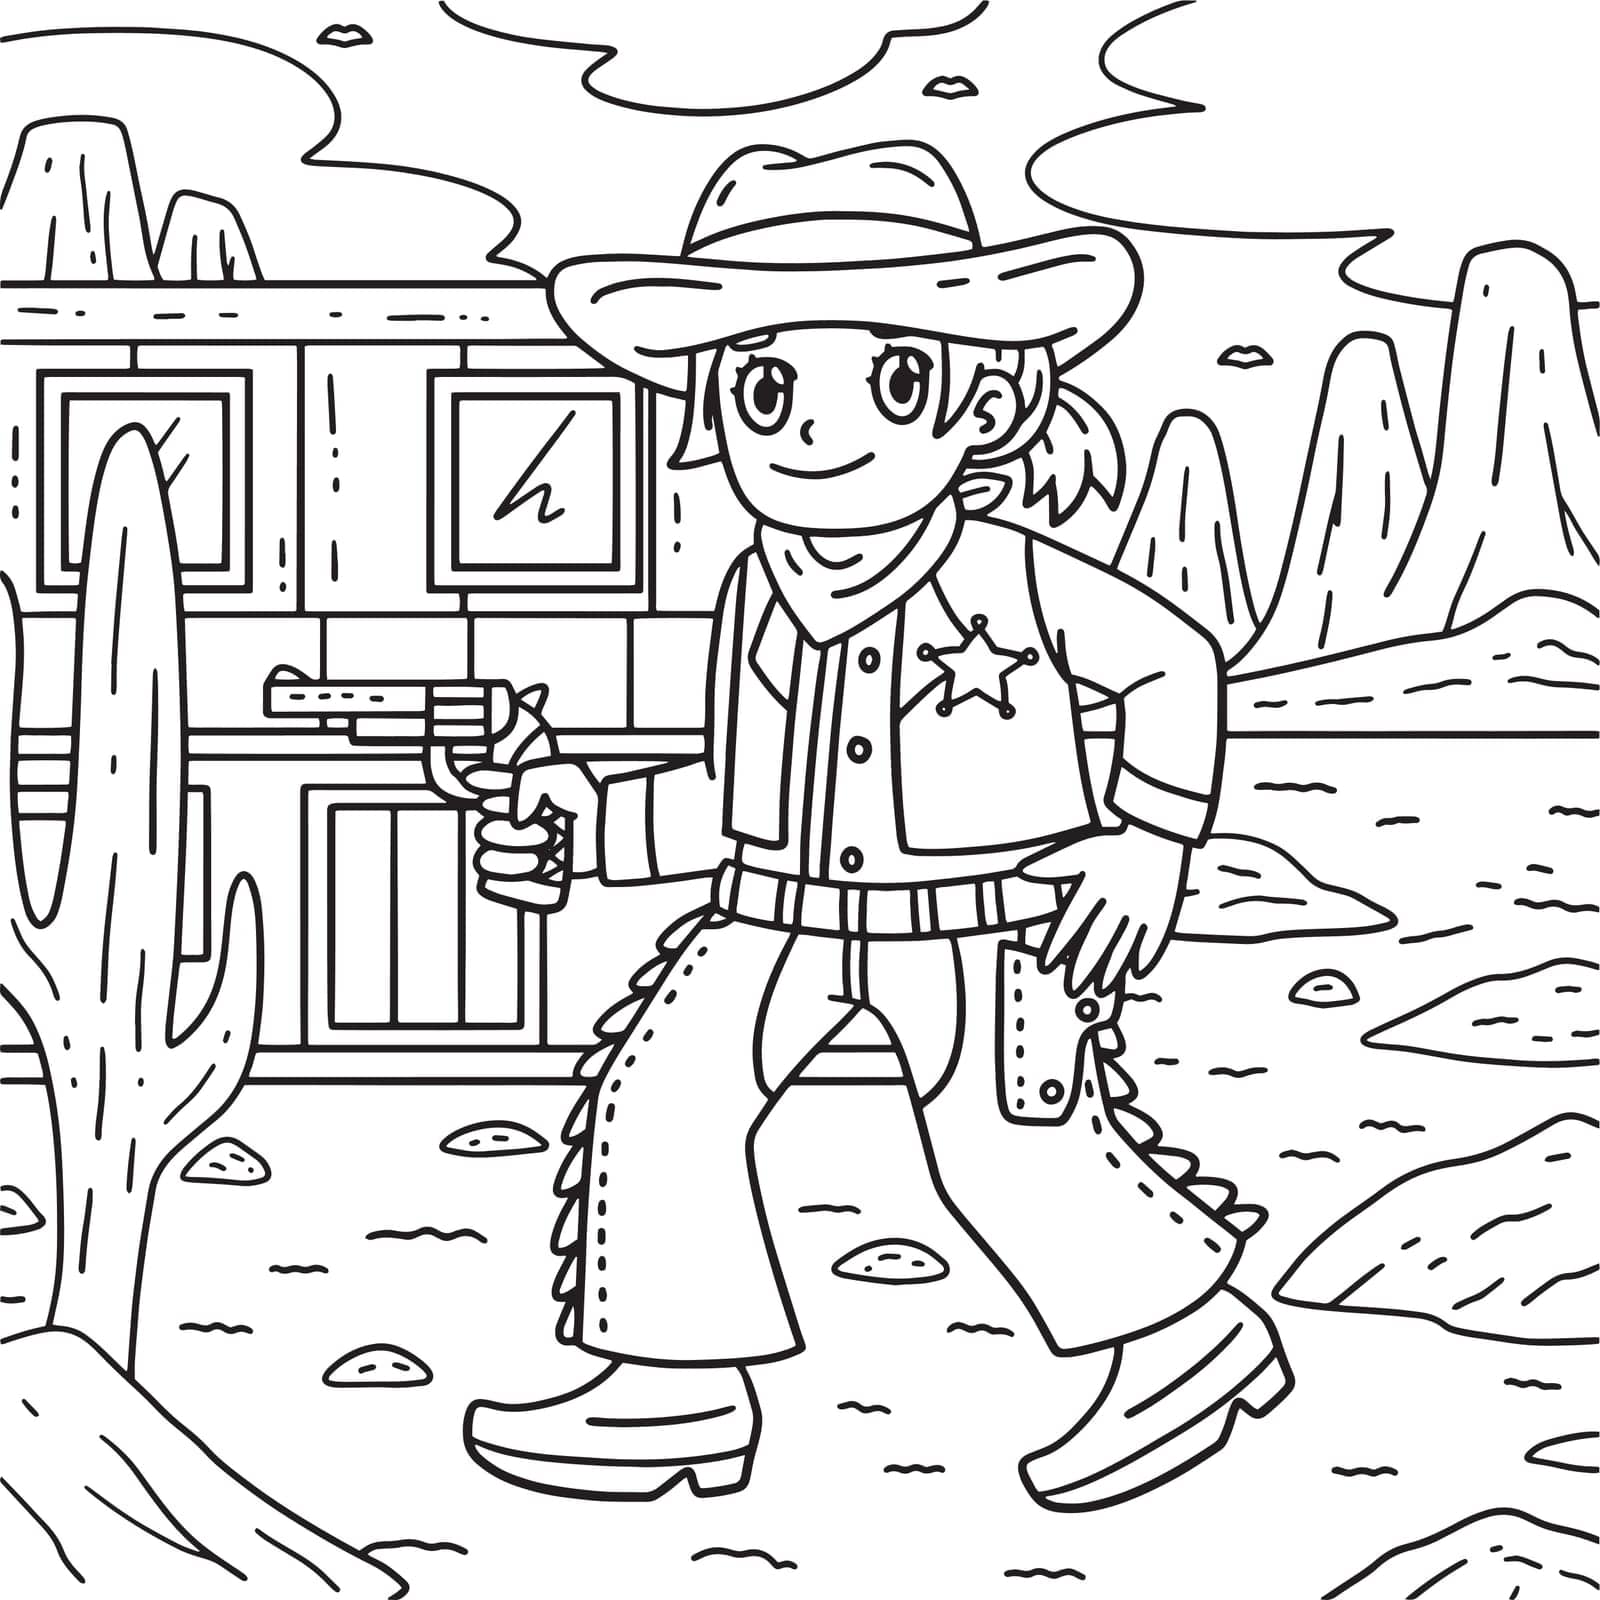 A cute and funny coloring page of a Cowgirl with a Gun. Provides hours of coloring fun for children. To color, this page is very easy. Suitable for little kids and toddlers.